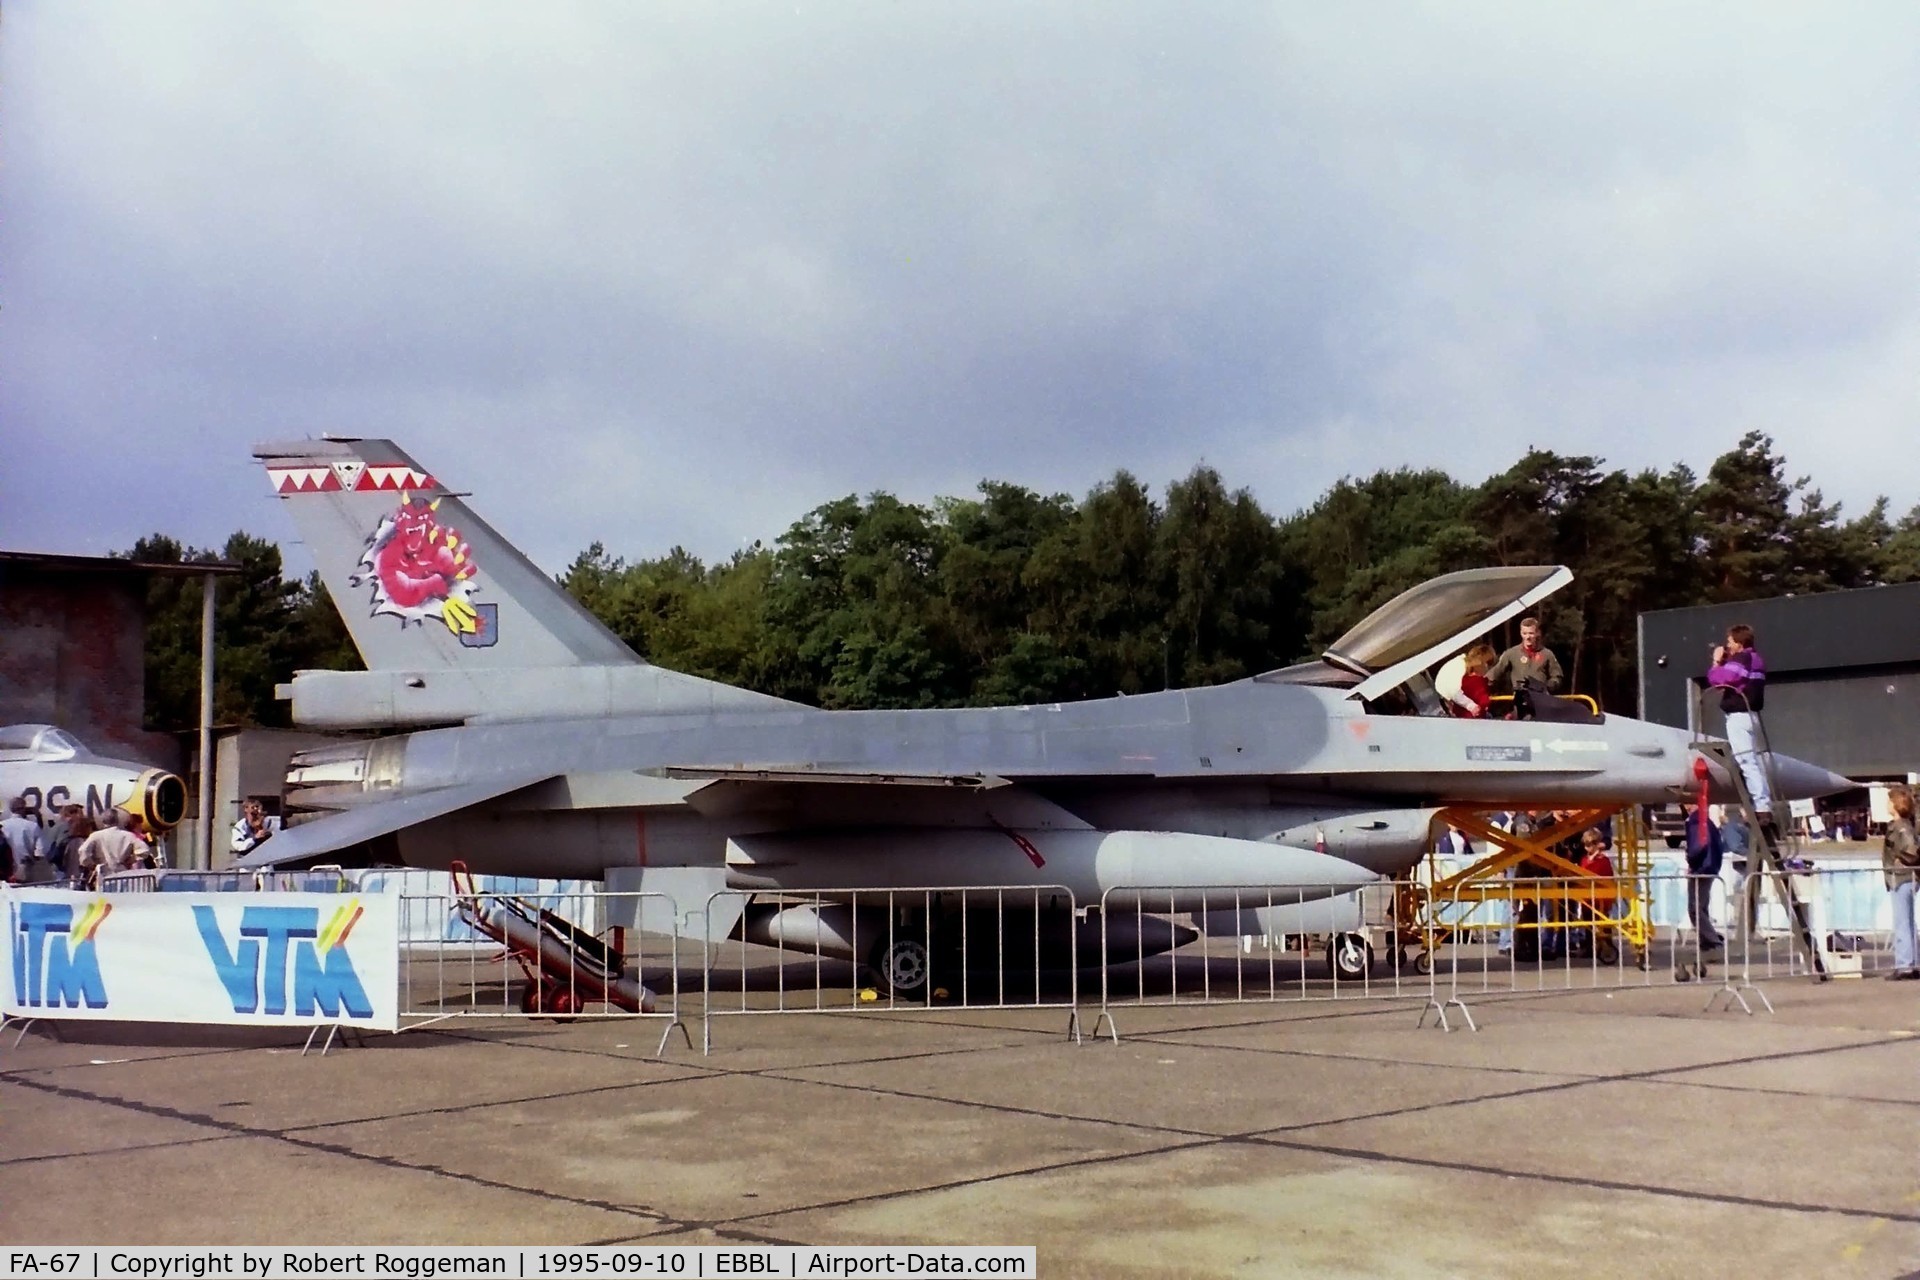 FA-67, 1980 SABCA F-16AM Fighting Falcon C/N 6H-67, F-16A.SPECIAL PAINT 23 SQN.